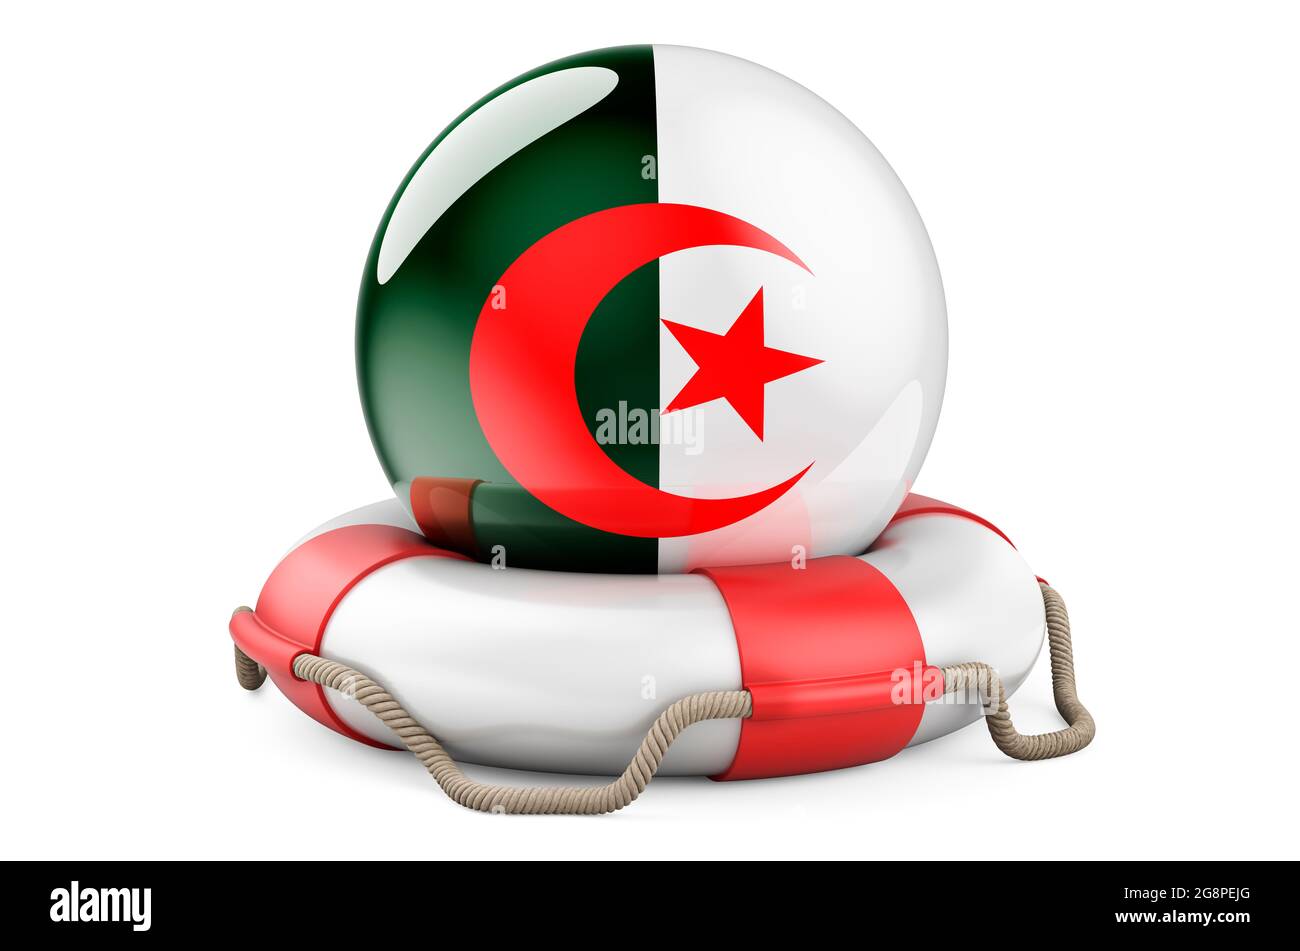 Lifebelt with Algerian flag. Safe, help and protect of Algeria concept. 3D rendering isolated on white background Stock Photo